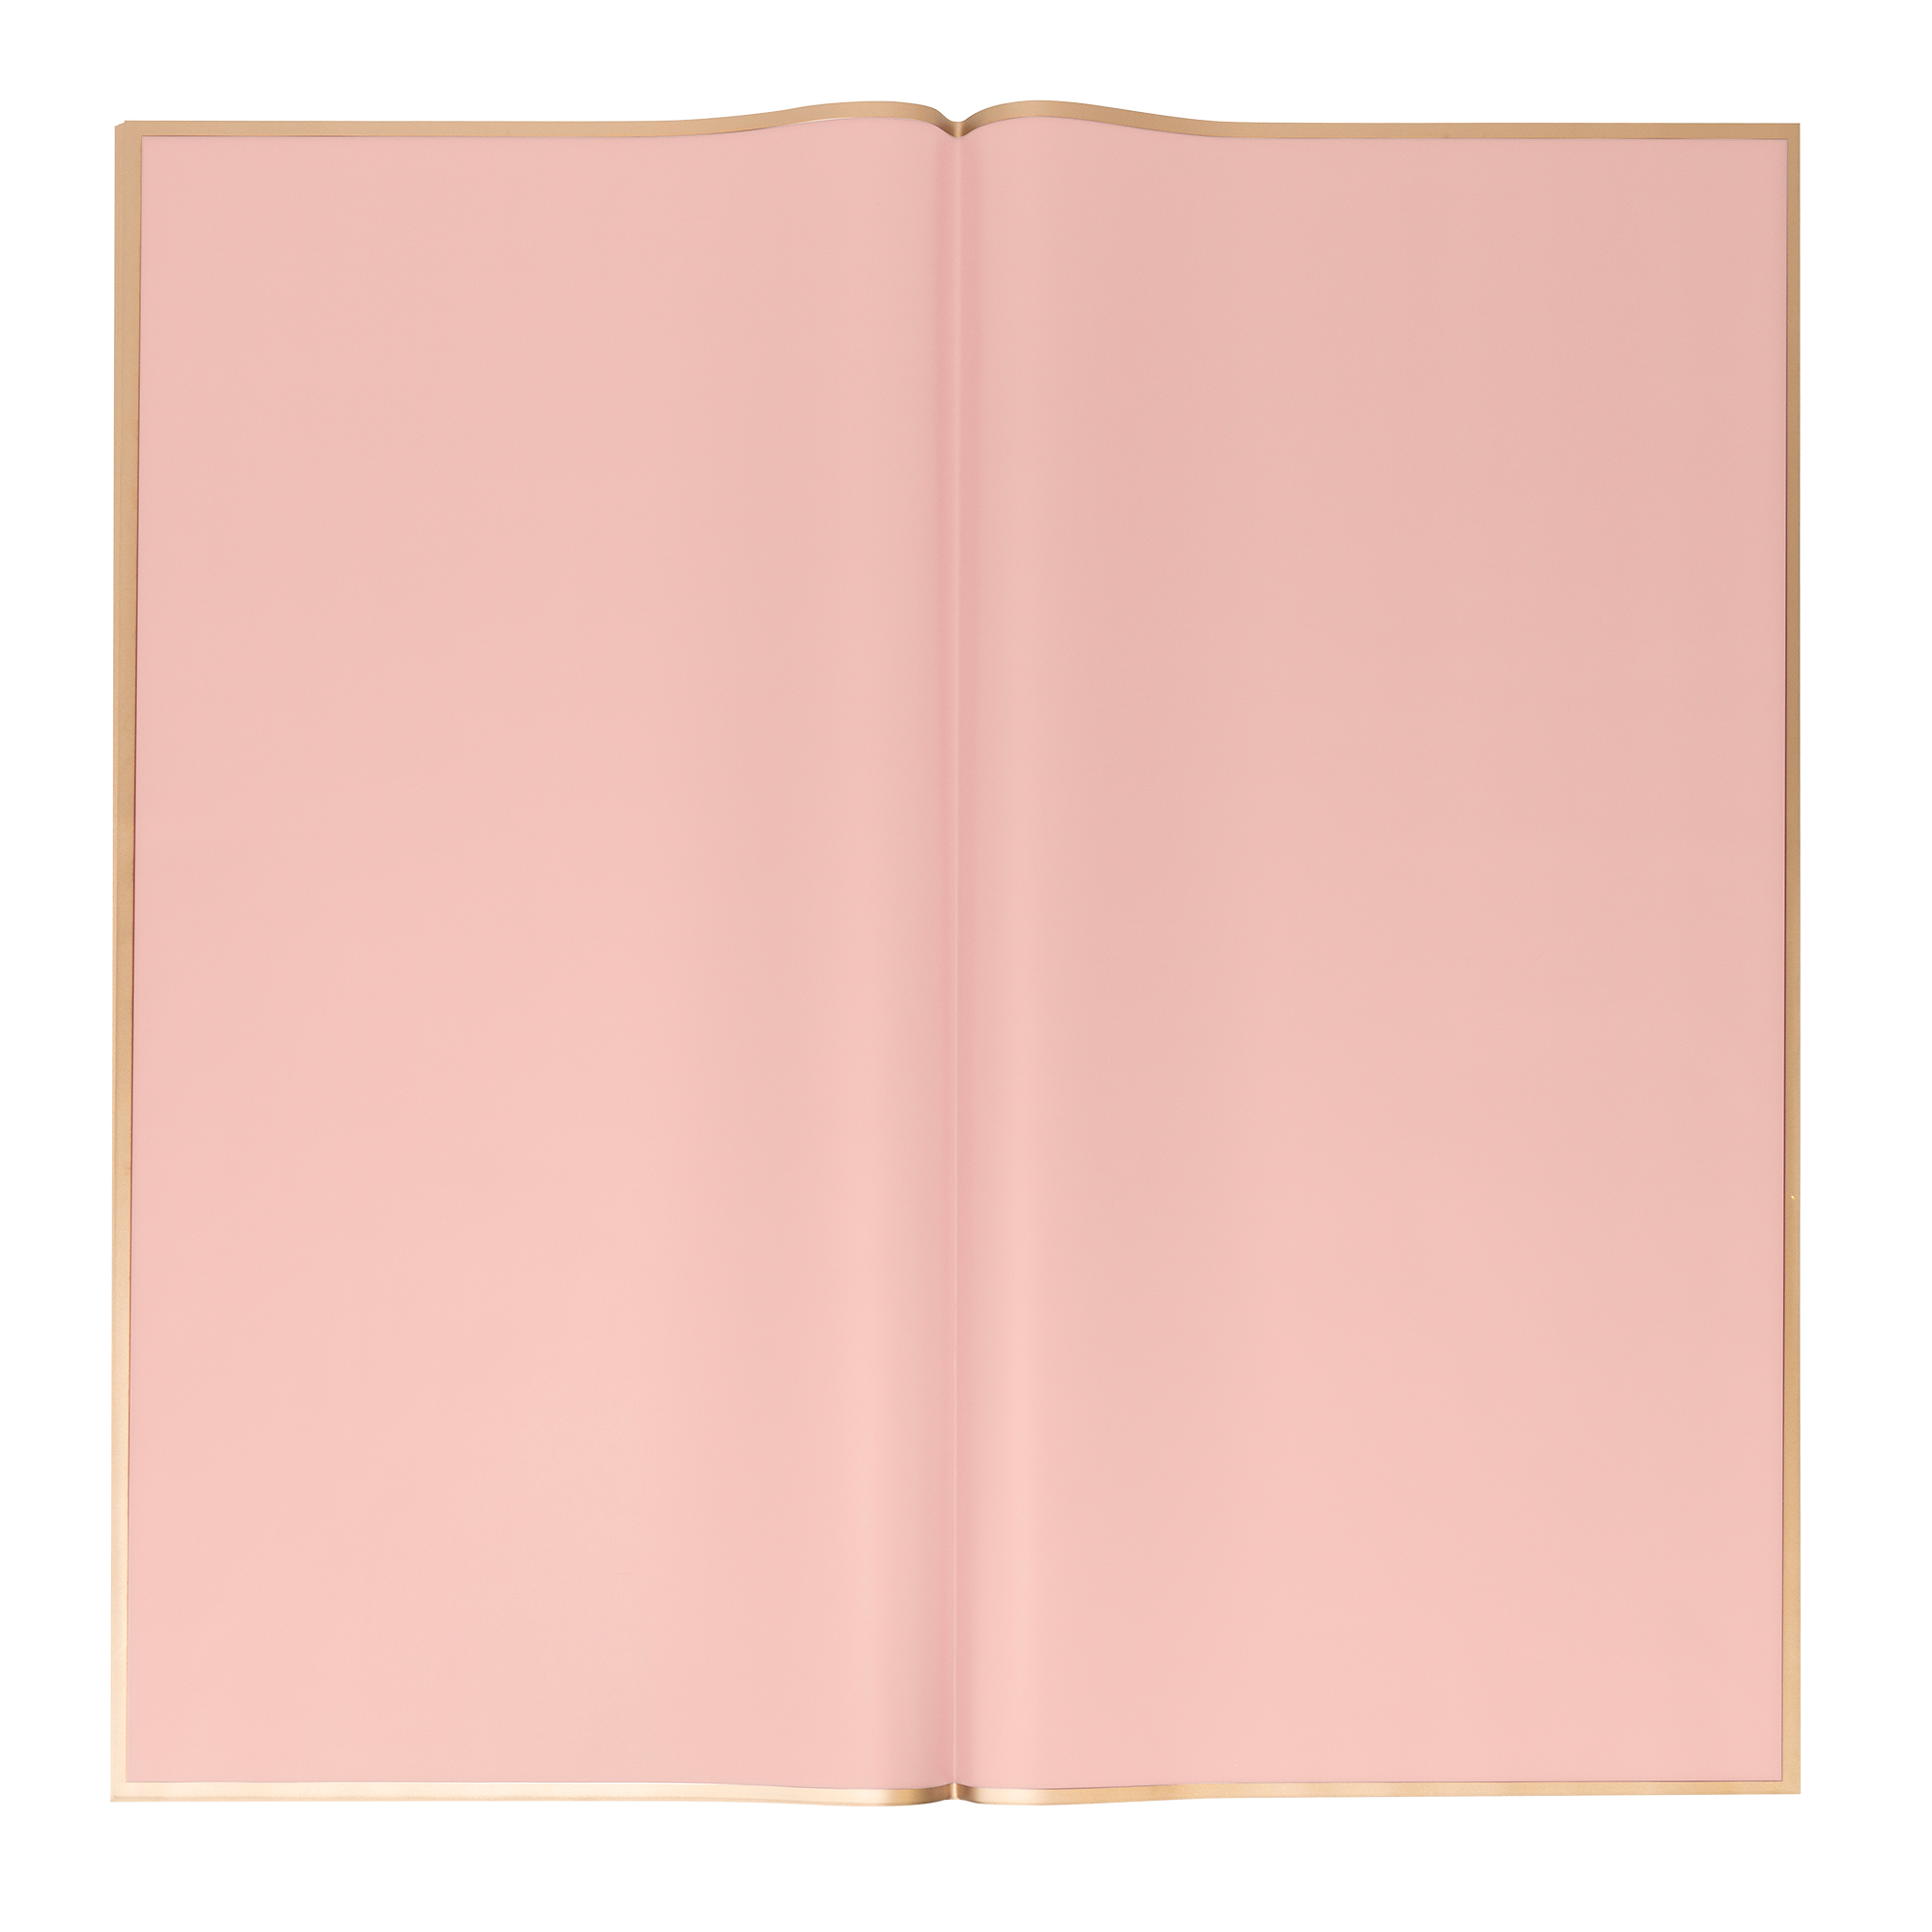 Floral Wrapping Paper With Gold Edge 20pc/pack  - Blush